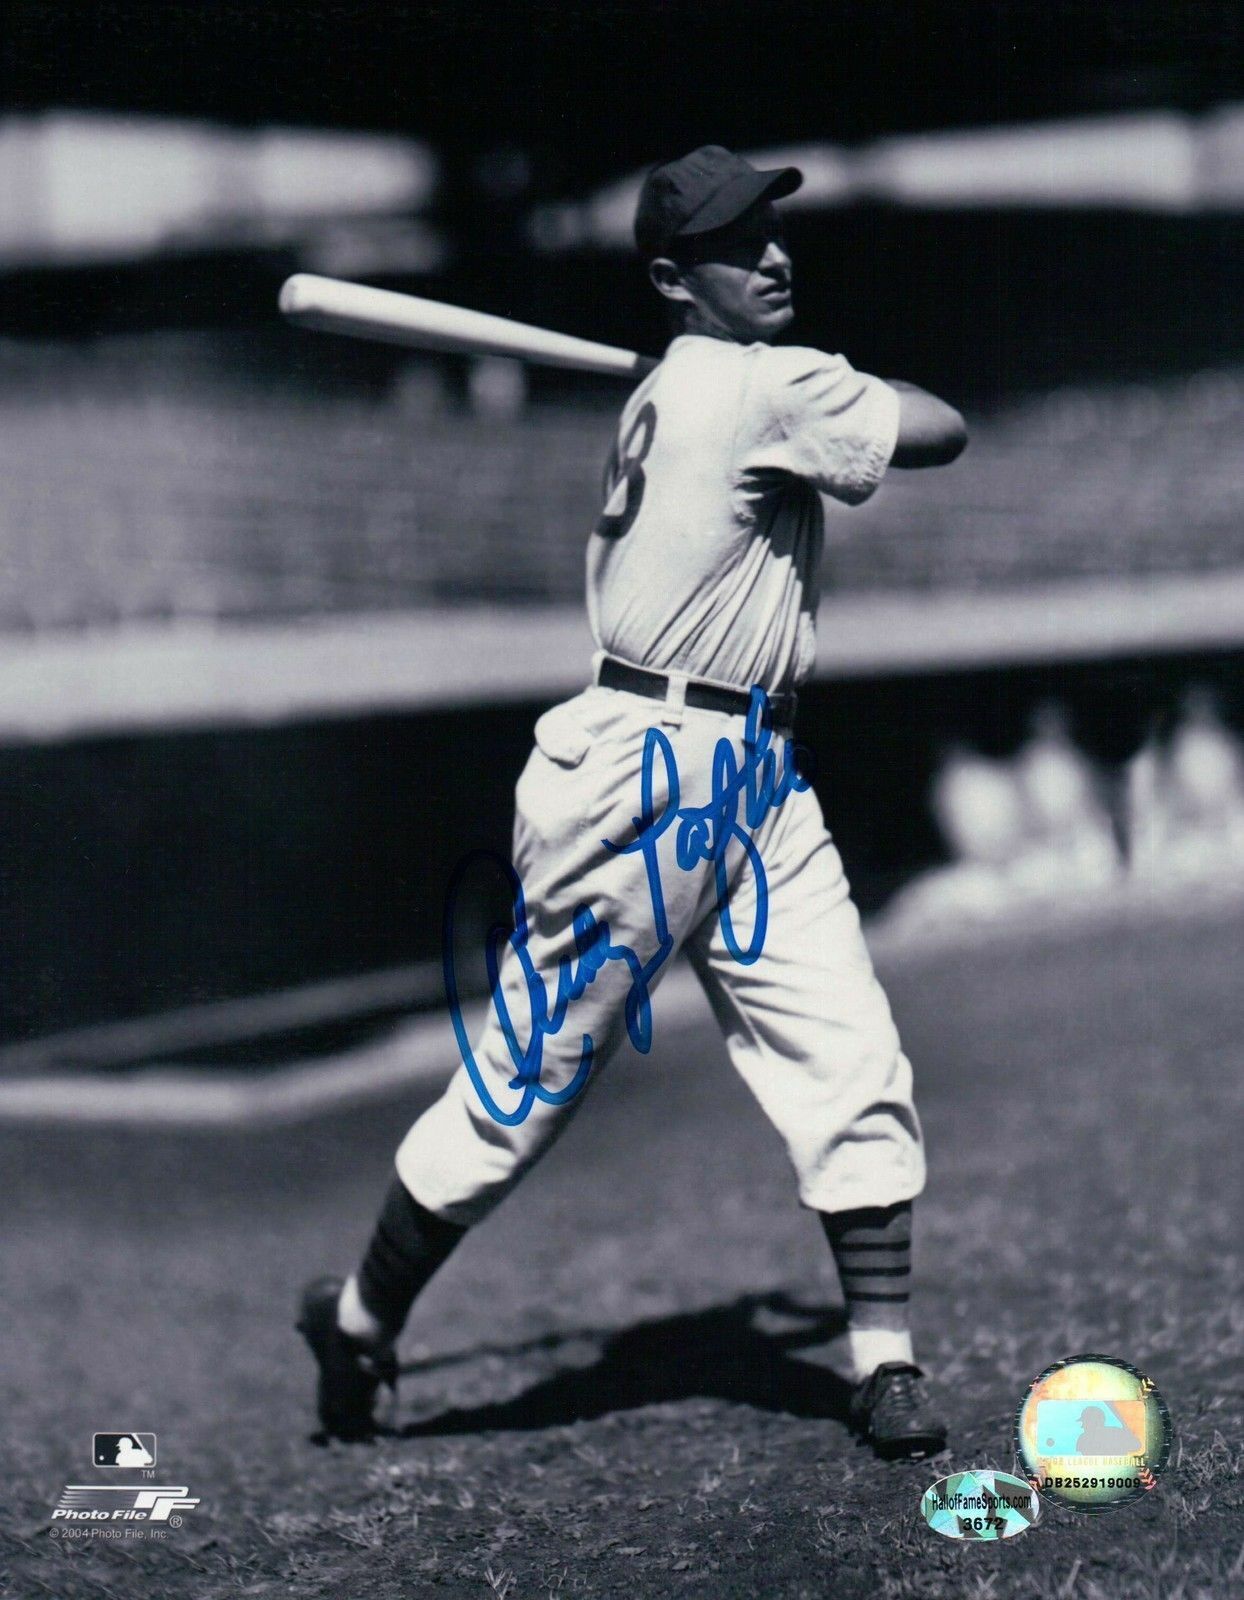 Andy Pafko Signed 8X10 Vintage Photo Poster painting Autograph B/W Braves w/Bat Auto w/COA